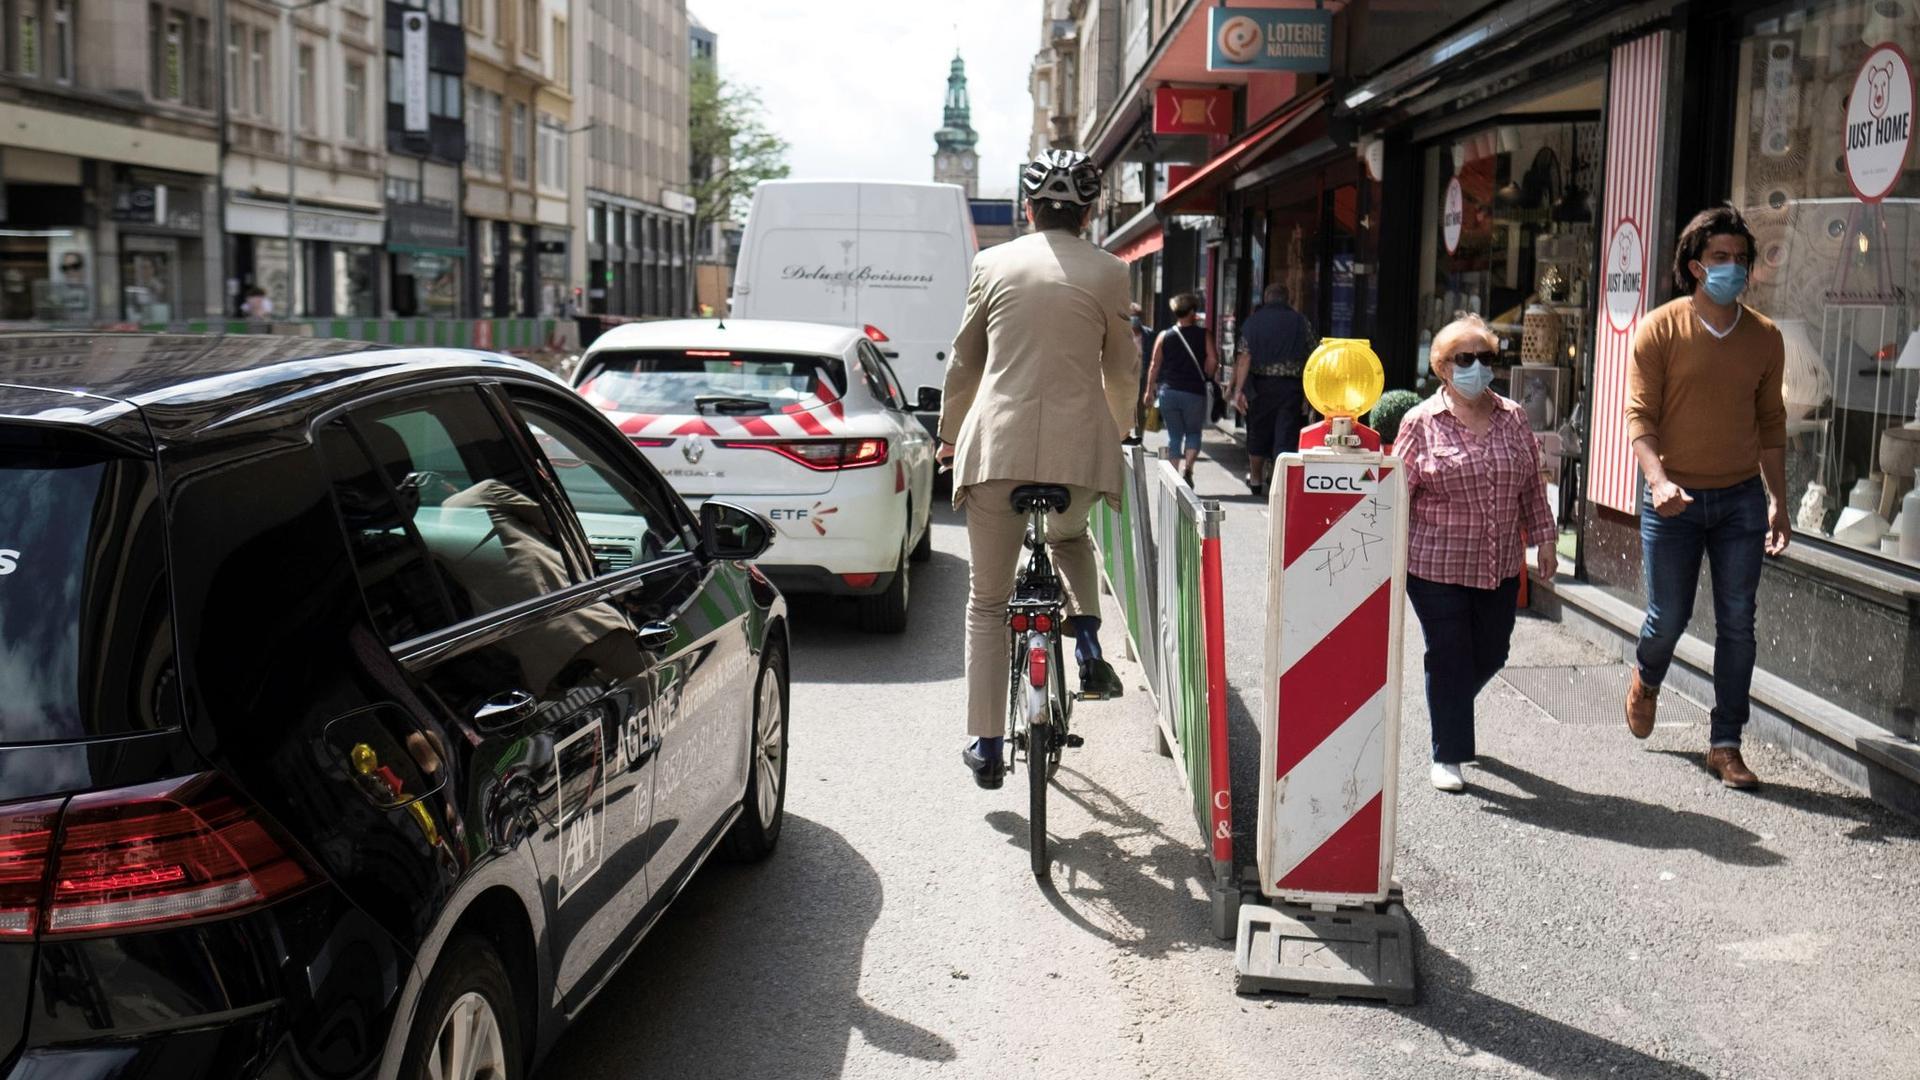 Wedged between cars and pedestrians, cyclists are having a tough time navigating Luxembourg's construction sites Photo: Guy Wolff